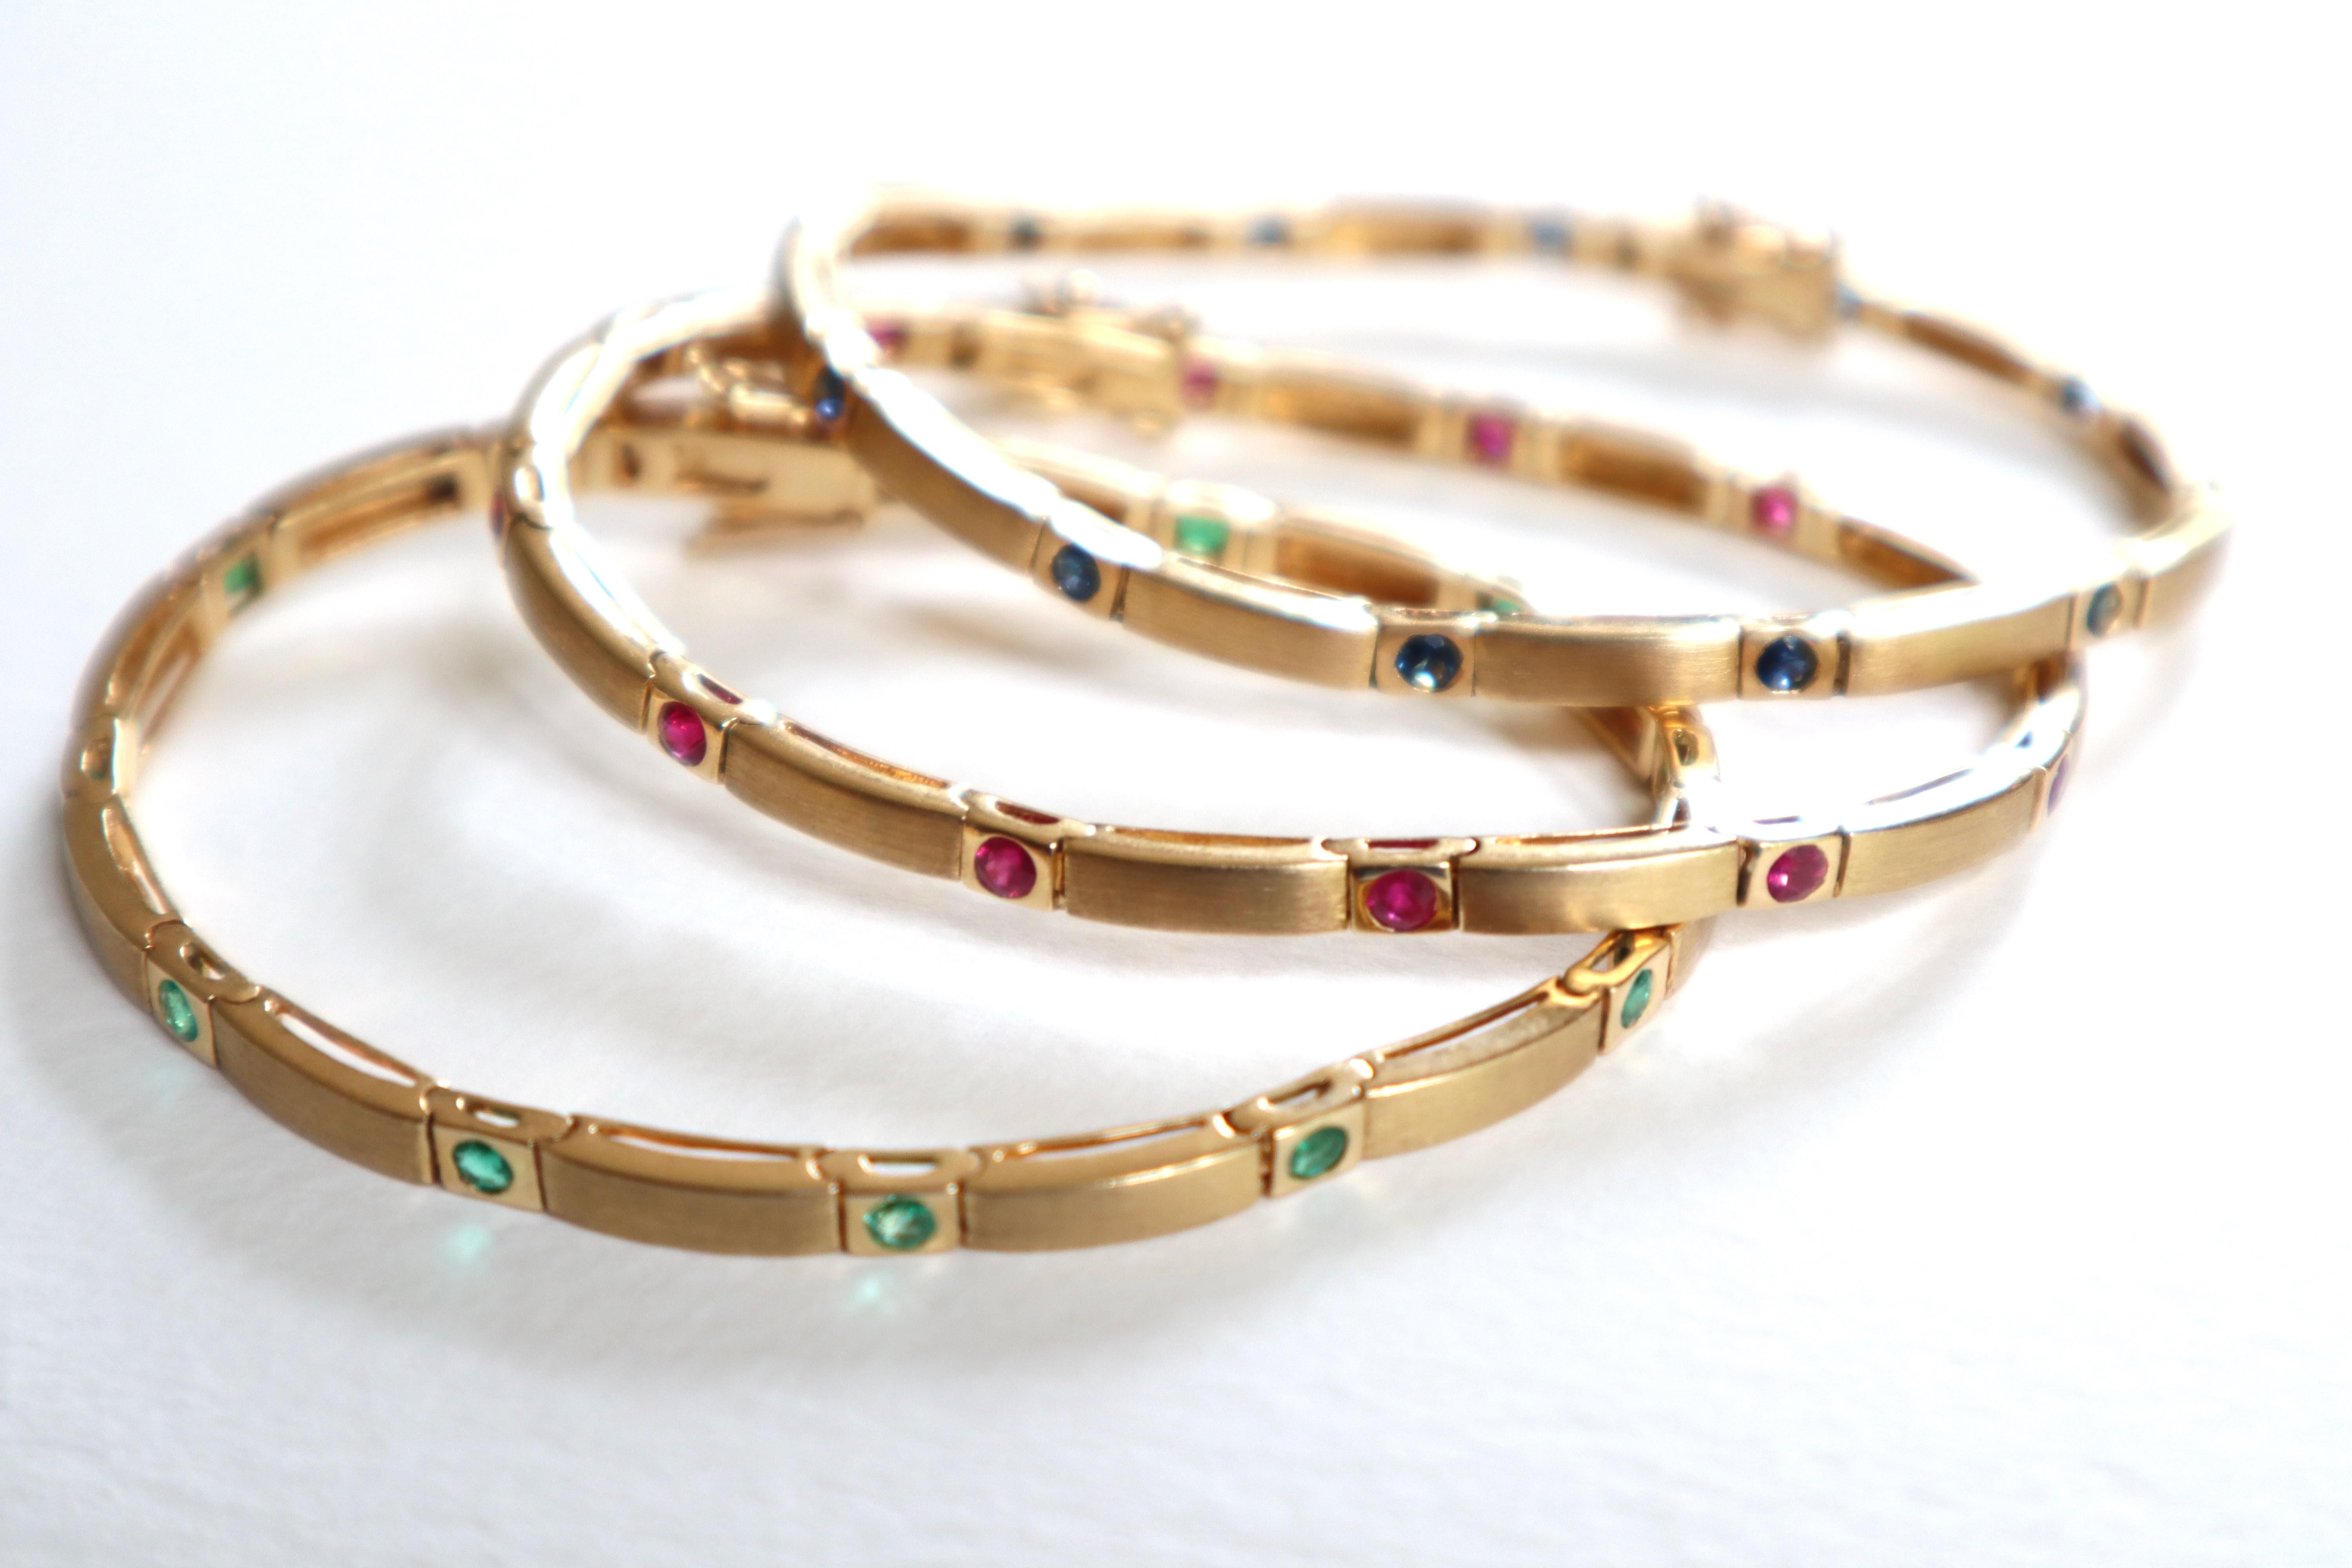 Set of 3 Bracelets in 18 Kt Yellow Satin Gold, Rubies, Emeralds, Sapphires For Sale 2